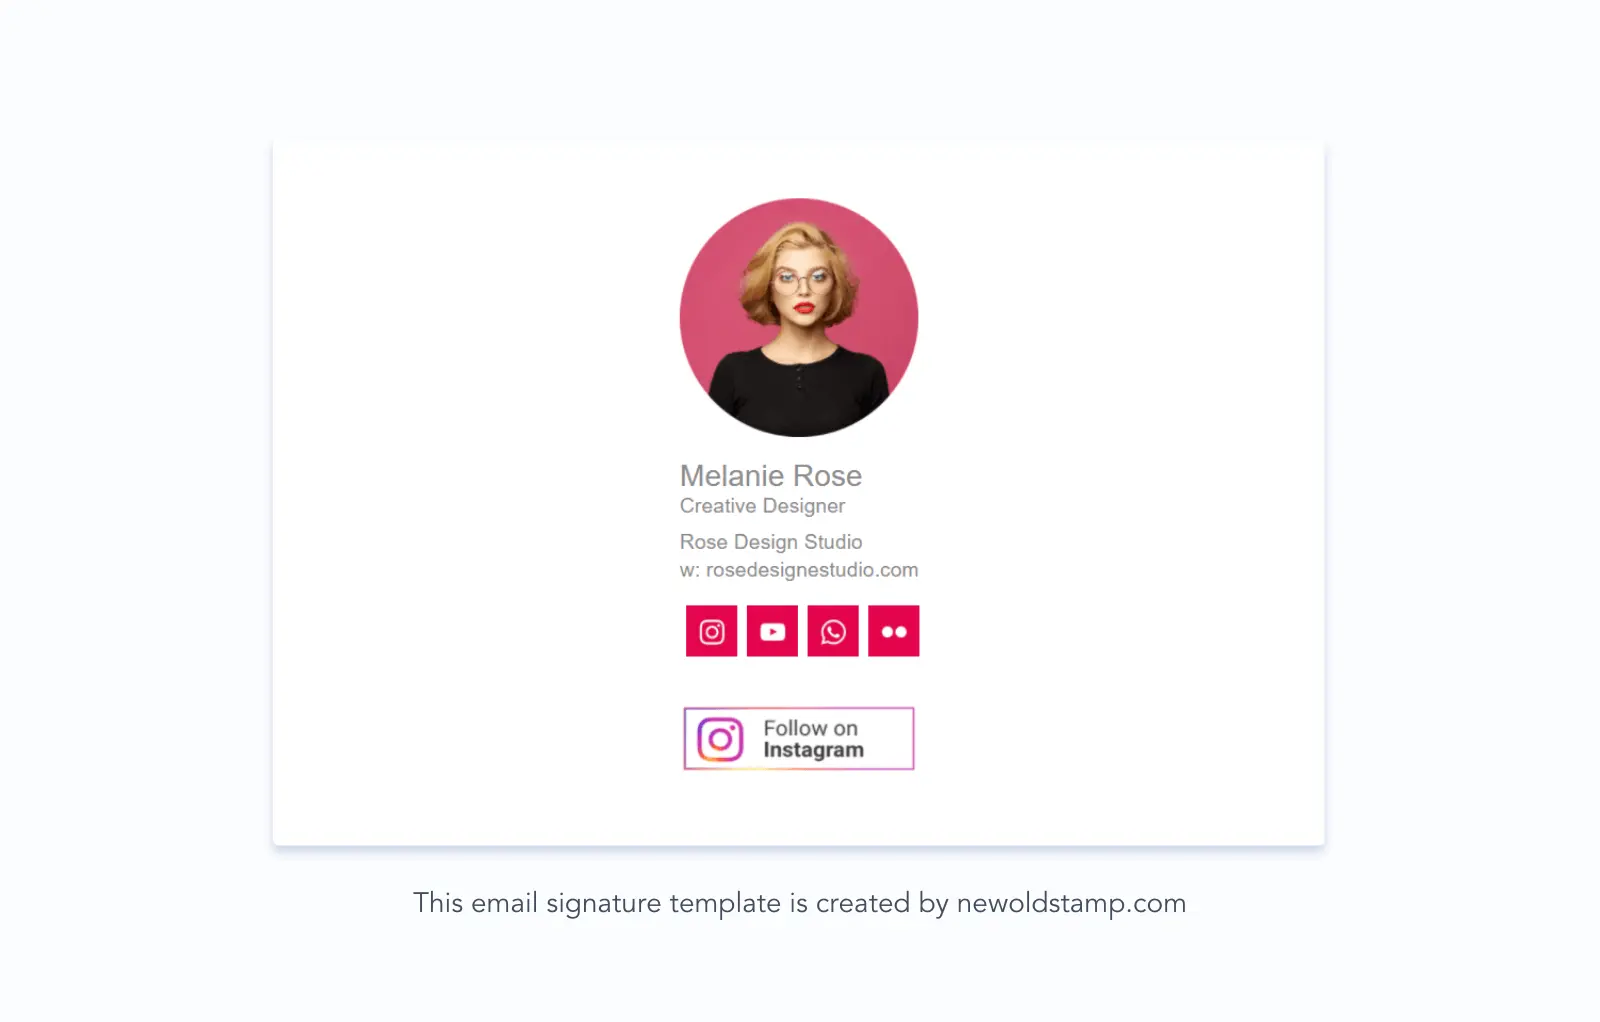 Email signature with an Instagram CTA